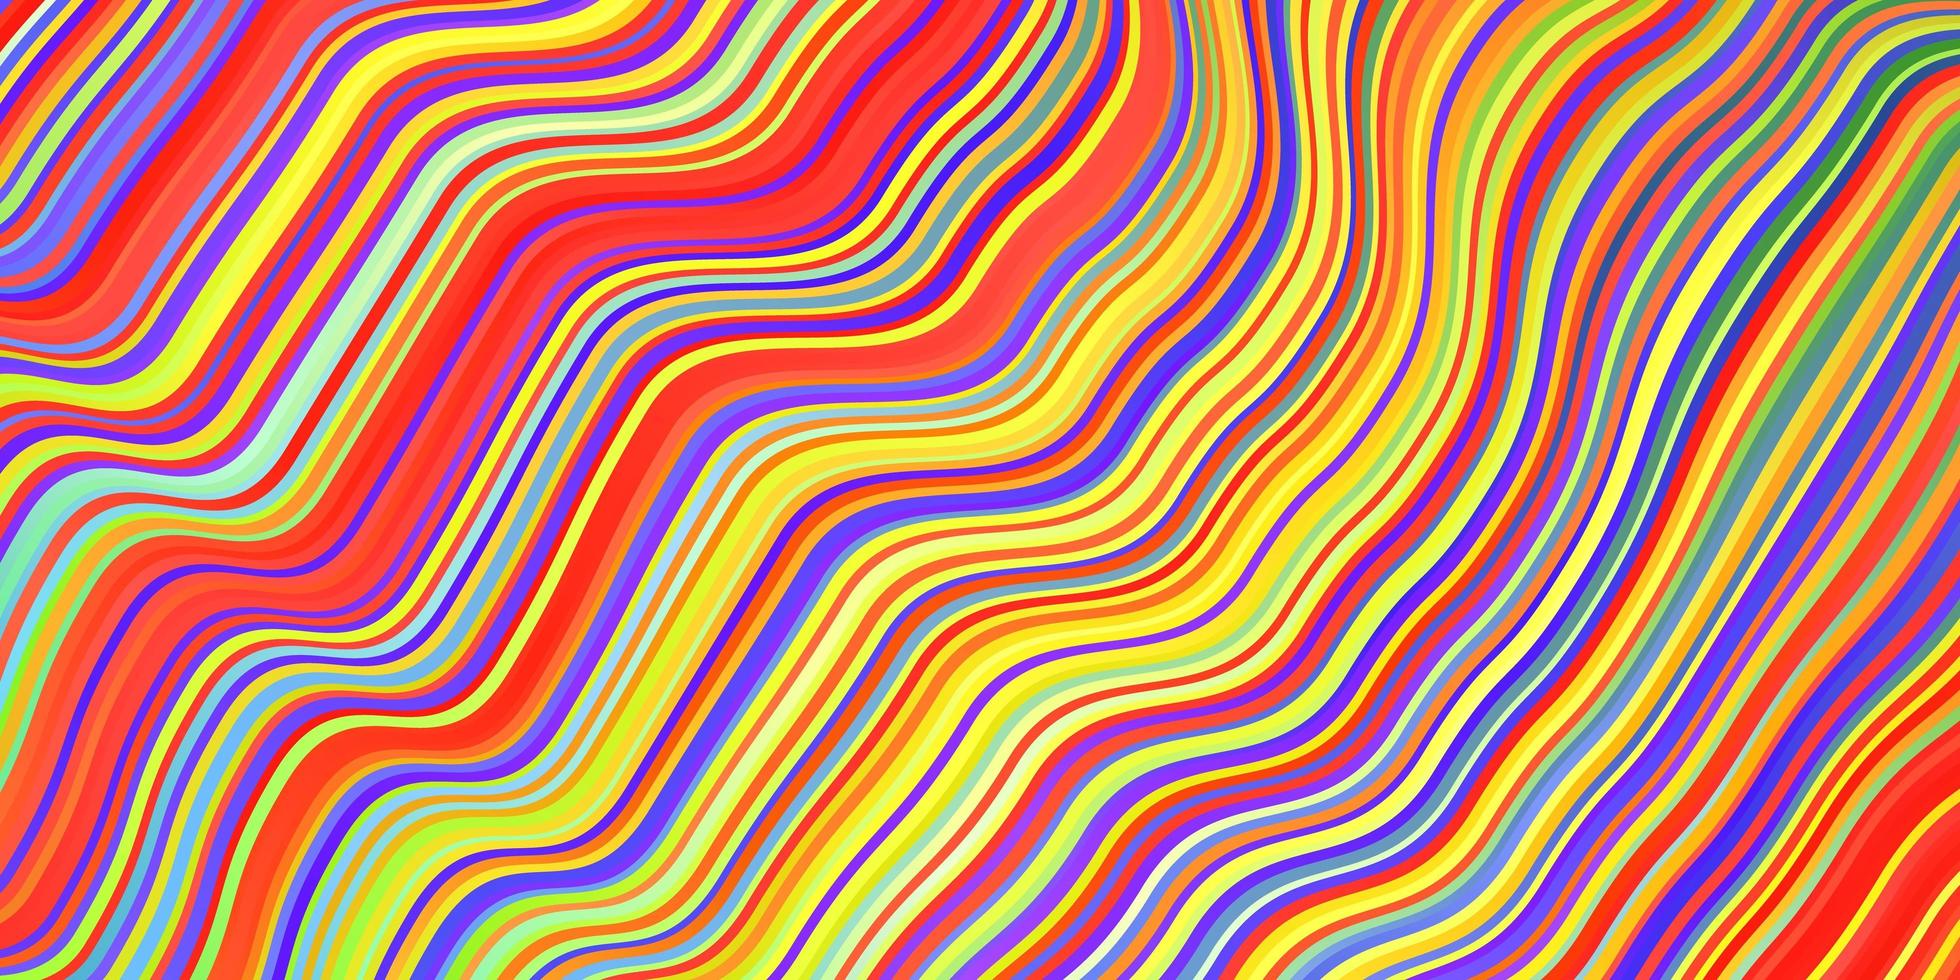 Light Multicolor vector texture with curves.